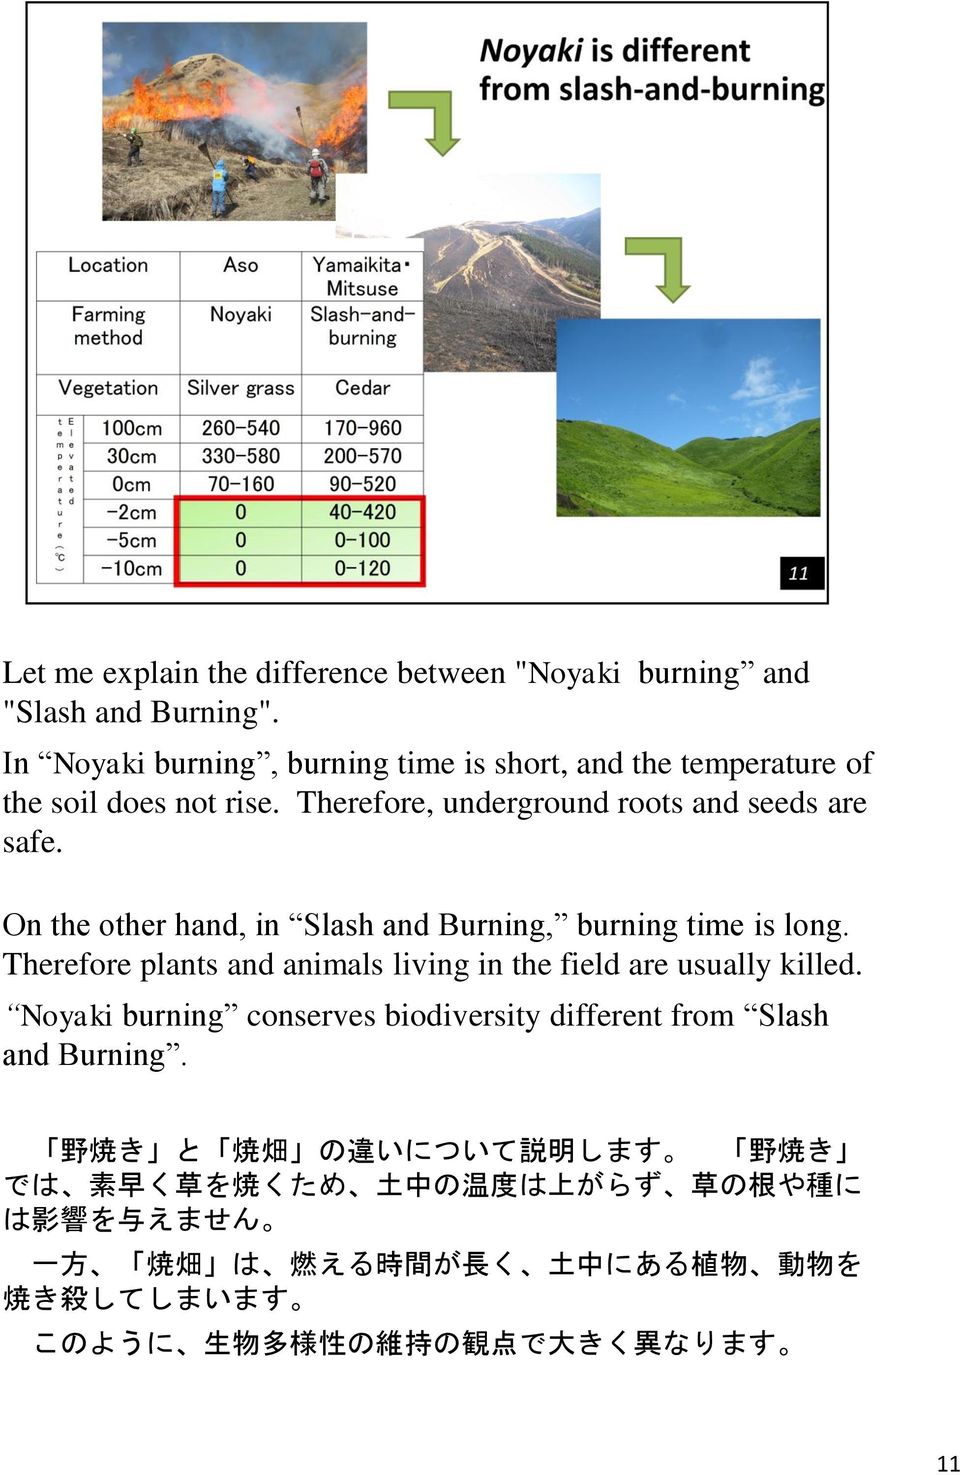 On the other hand, in Slash and Burning, burning time is long. Therefore plants and animals living in the field are usually killed.